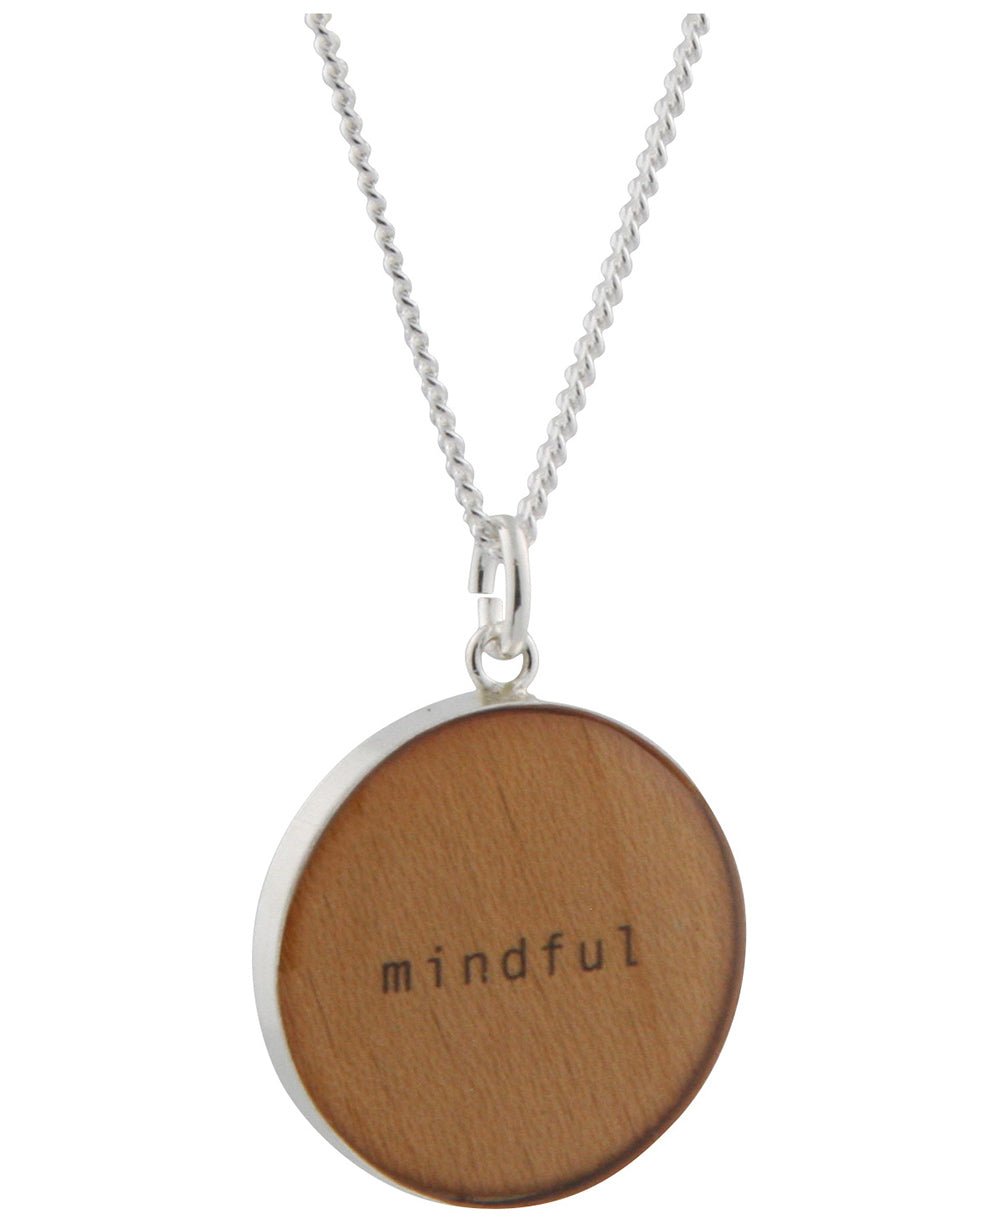 Handmade Wood Grain Mindfulness Necklaces, USA - Necklaces Mindful